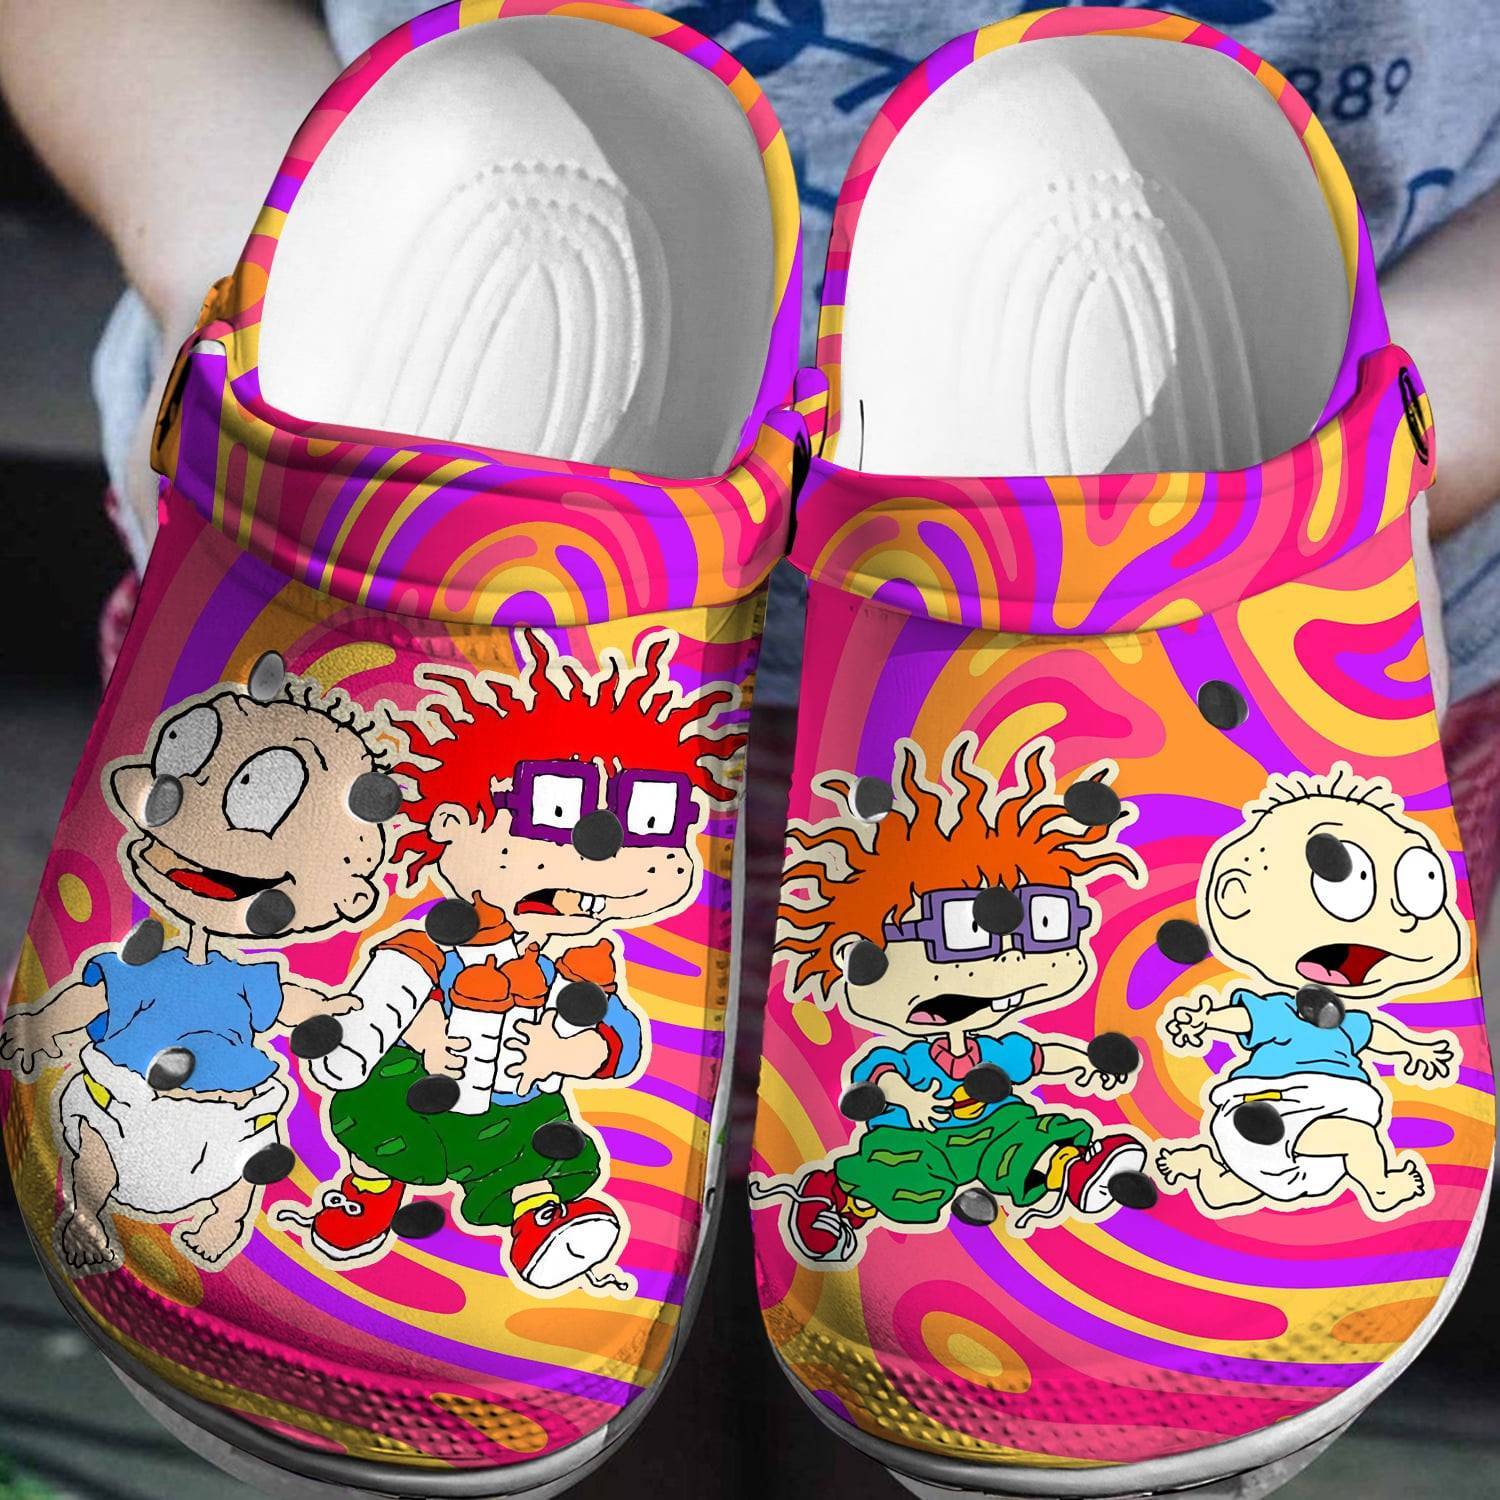 make your life colorful special design and good looking crocs funny characters crocs buy more save more jijtb